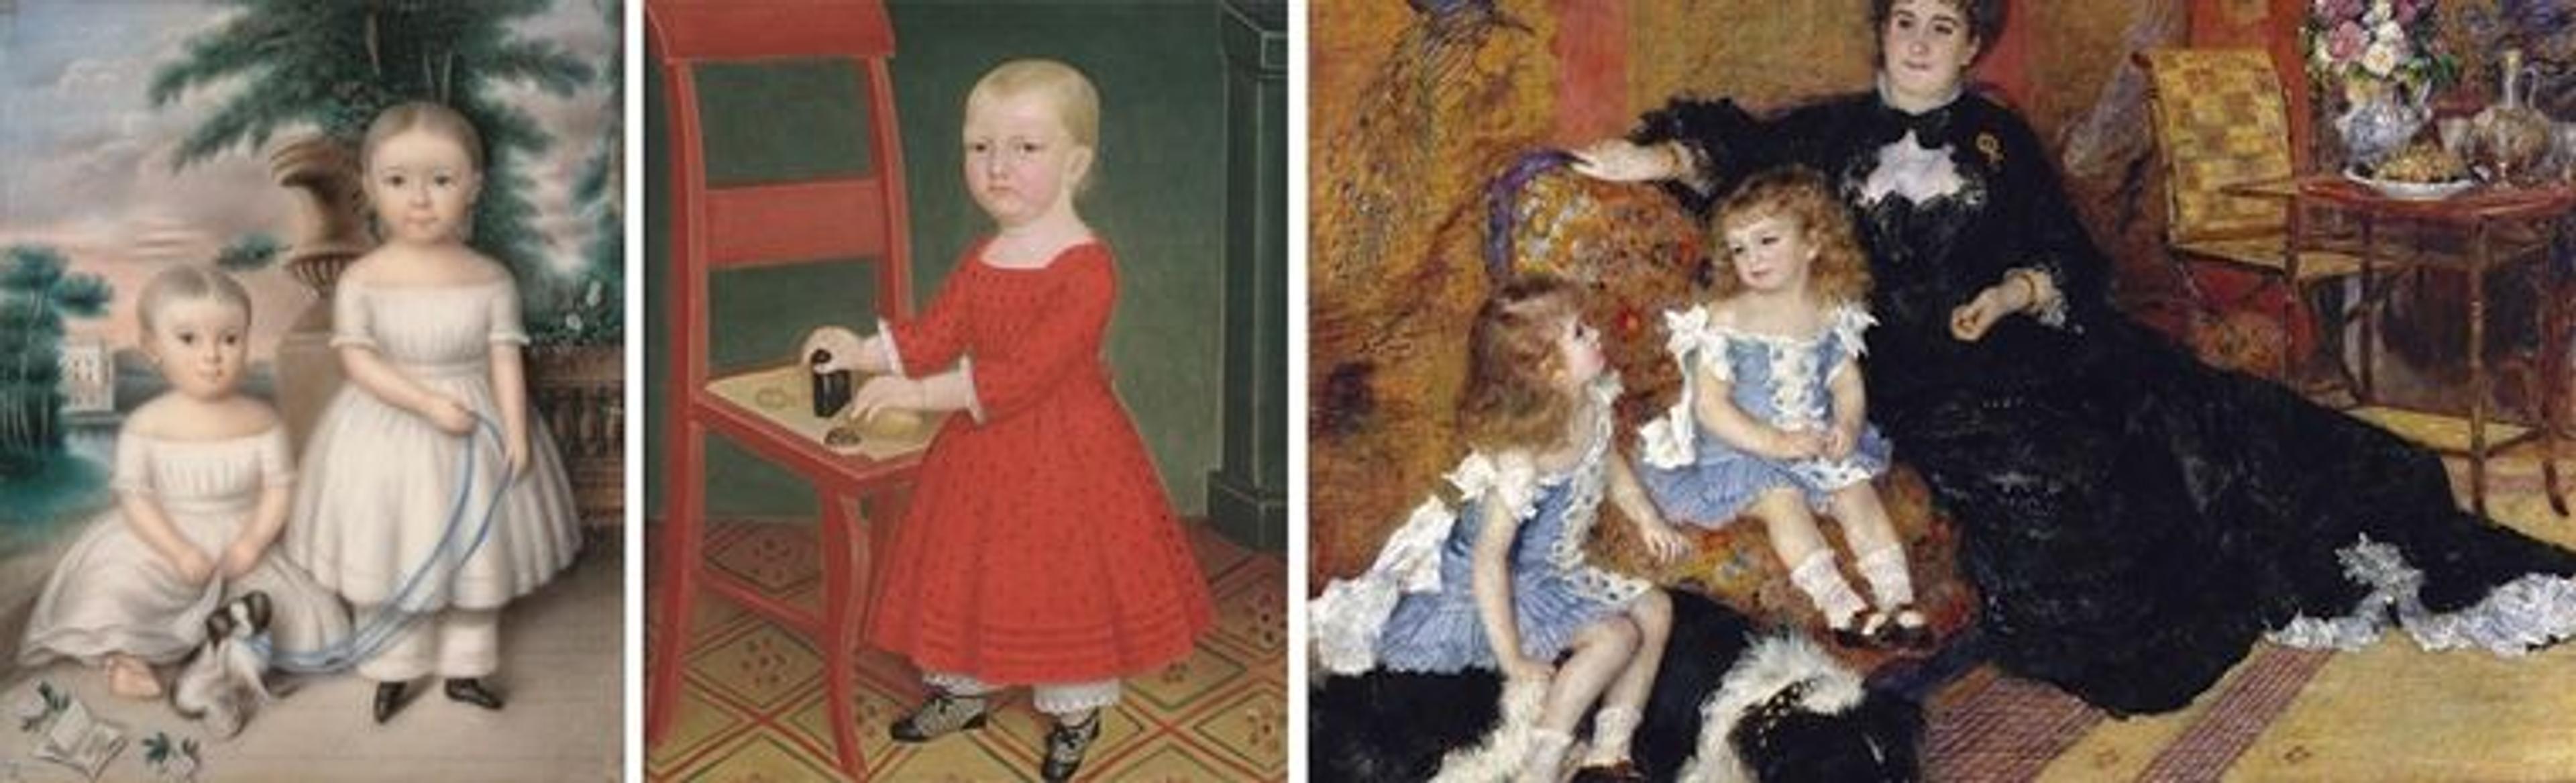 An arrangement of three portrait paintings of pale young children in fancy outfits with long yellow hair. The painting on the right is in a living room, with a leaning mother and sleeping dog.